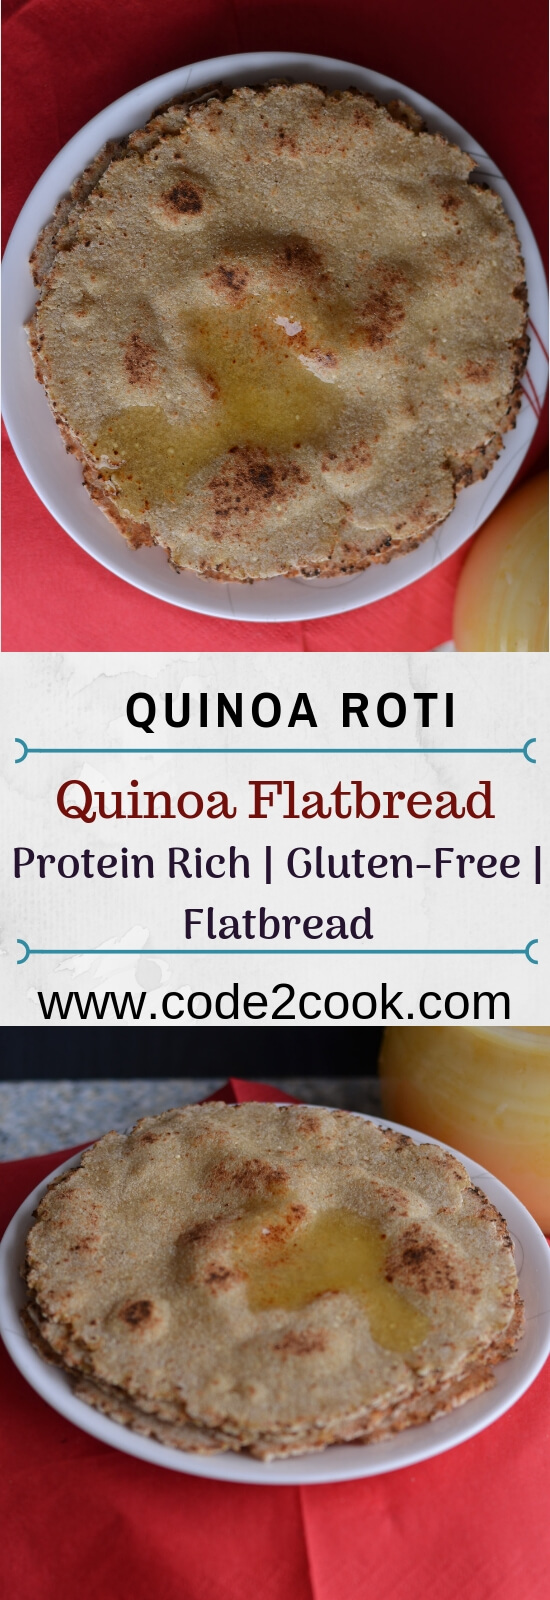 Quinoa roti or quinoa chapati is super easy and nutritious recipe. It is a great substitute for whole wheat chapati as it is gluten-free and helps in weight loss management protein-rich quinoa is very filling and provides vital nutrients to the body.